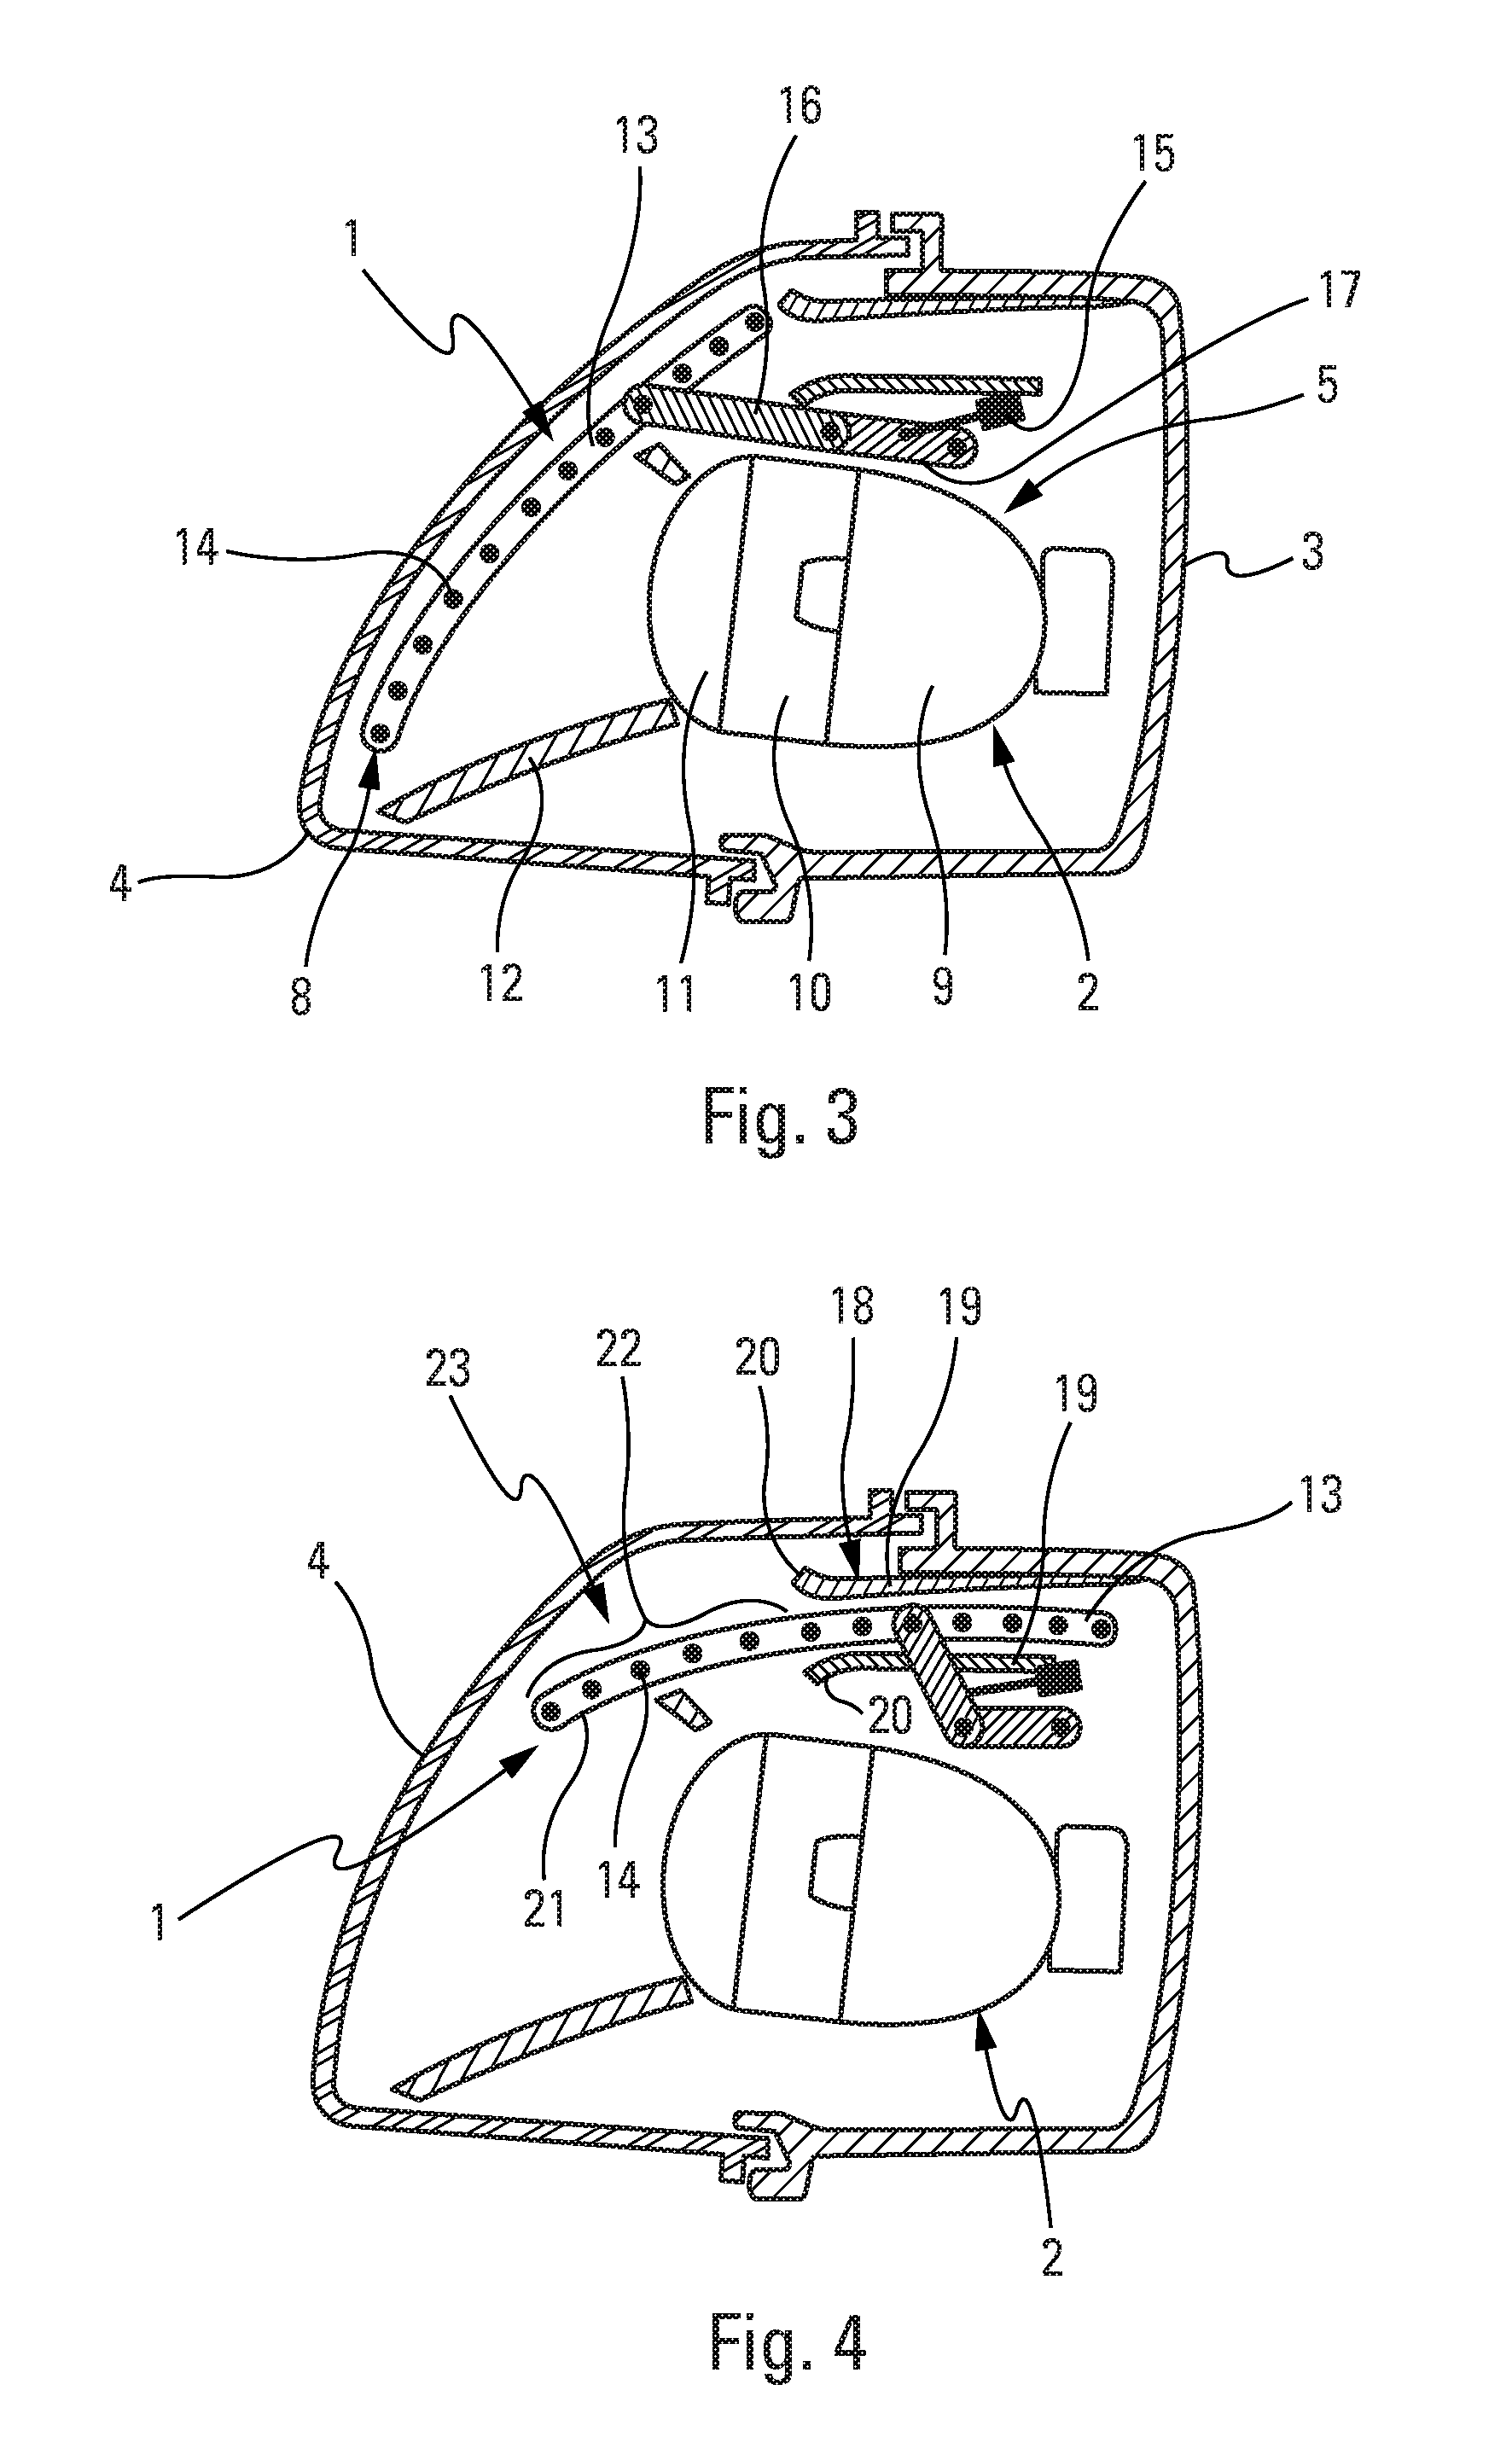 Lighting or signaling device with a moveable daytime element